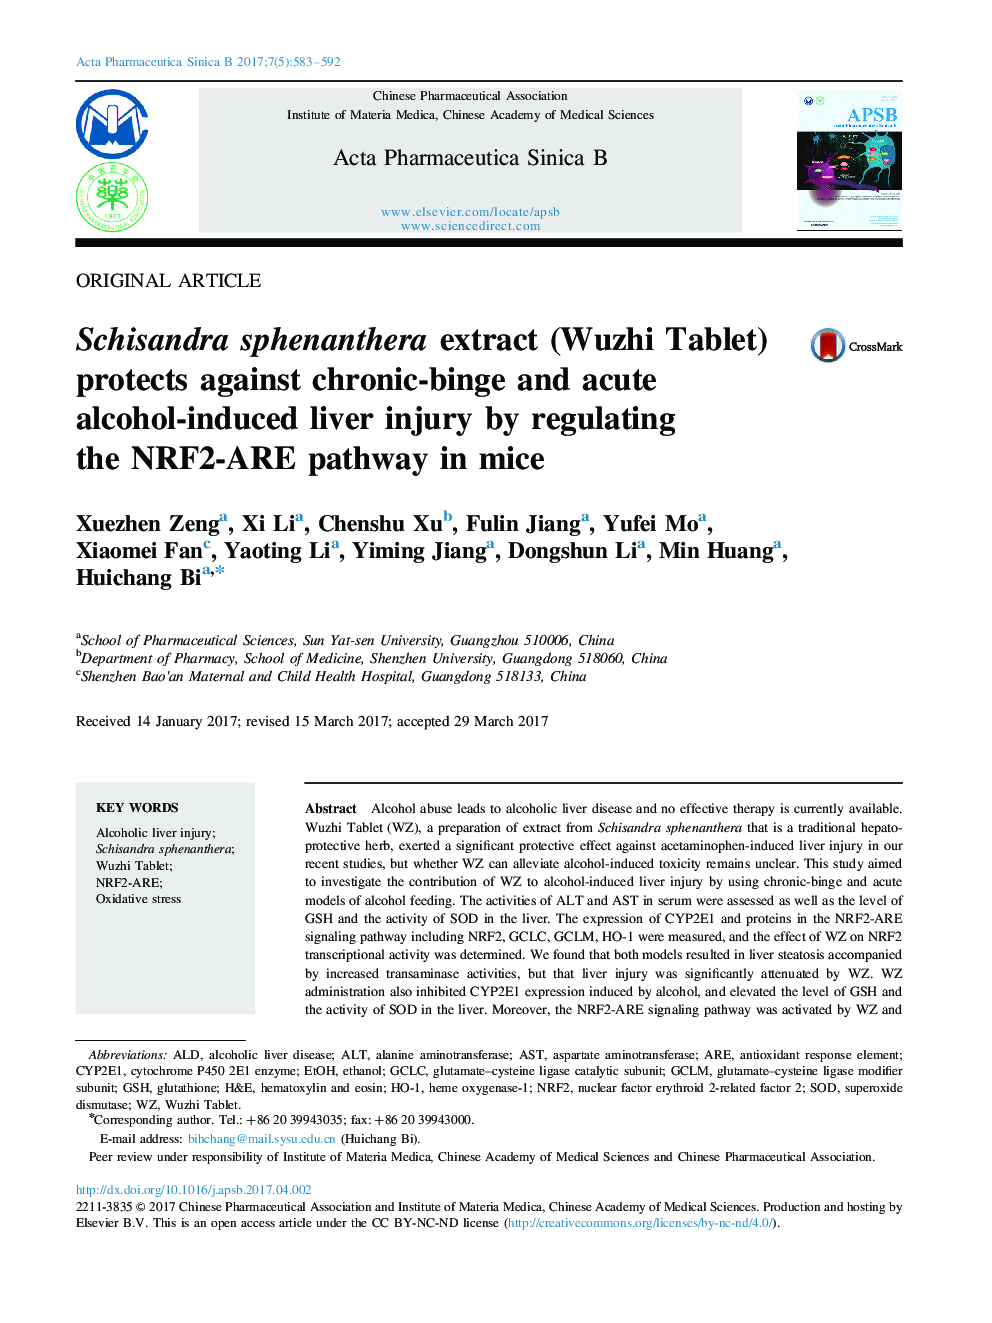 Schisandra sphenanthera extract (Wuzhi Tablet) protects against chronic-binge and acute alcohol-induced liver injury by regulating the NRF2-ARE pathway in mice